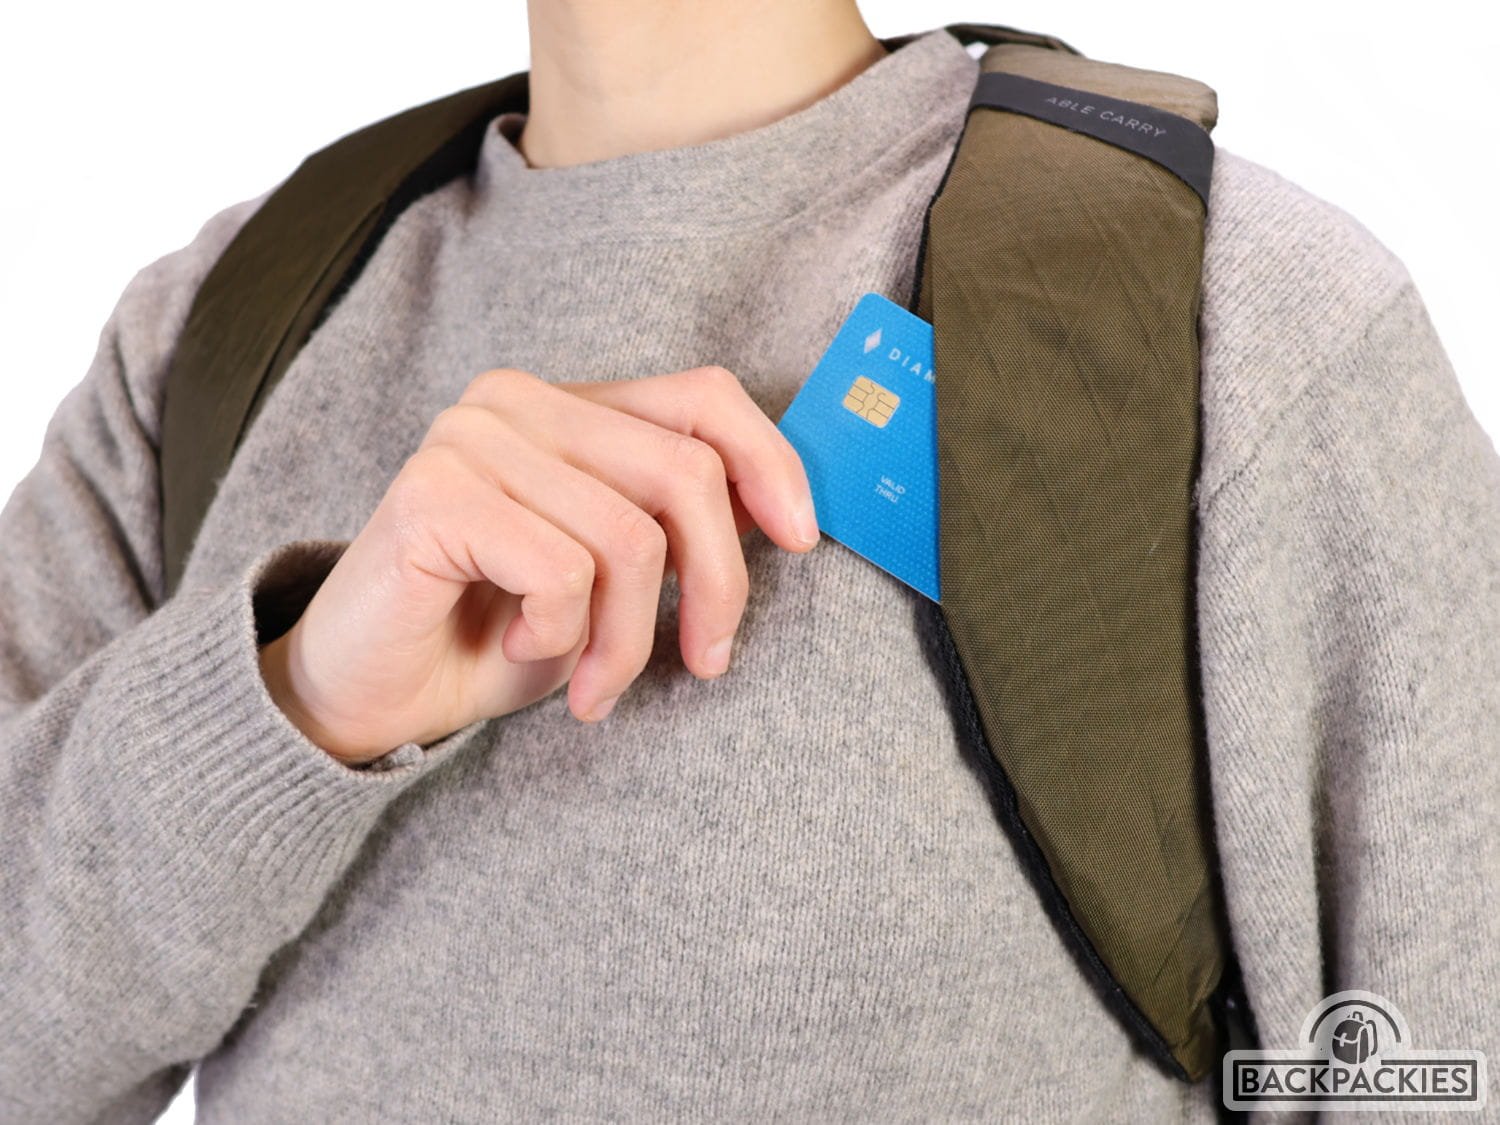 14 Backpack Strap and Pouch Options for Phone, Cards and Tech!